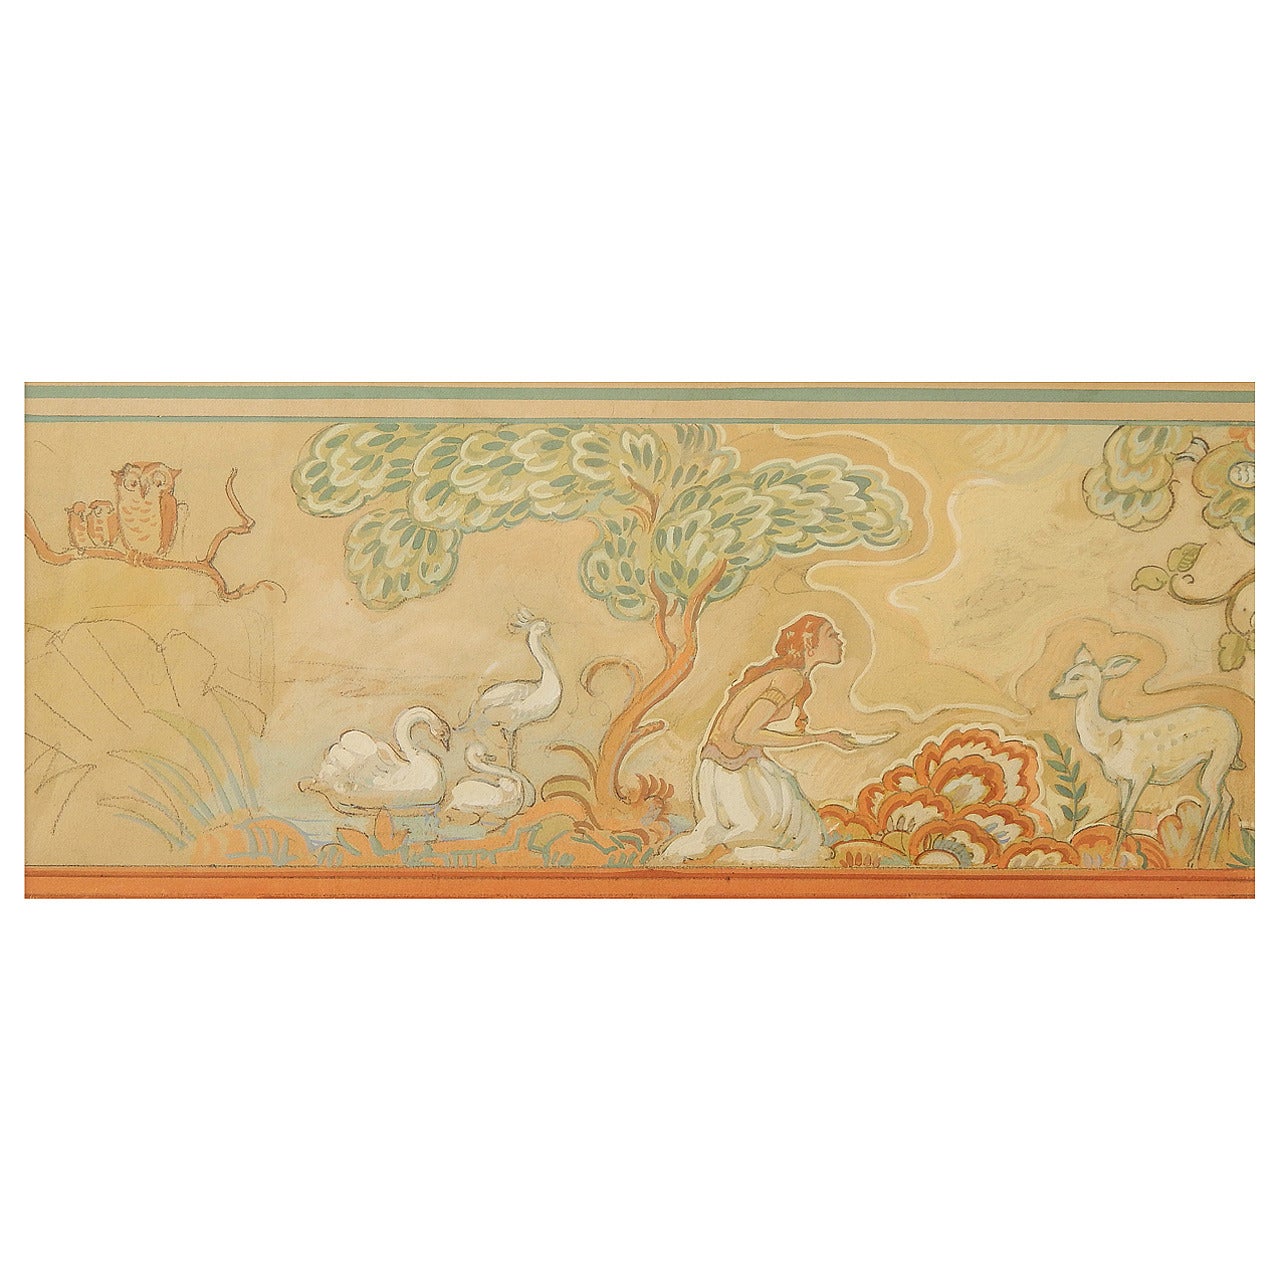 "Nymph and Fawn in Paradise, " Superb Art Deco Mural Study Painting by Petersen For Sale